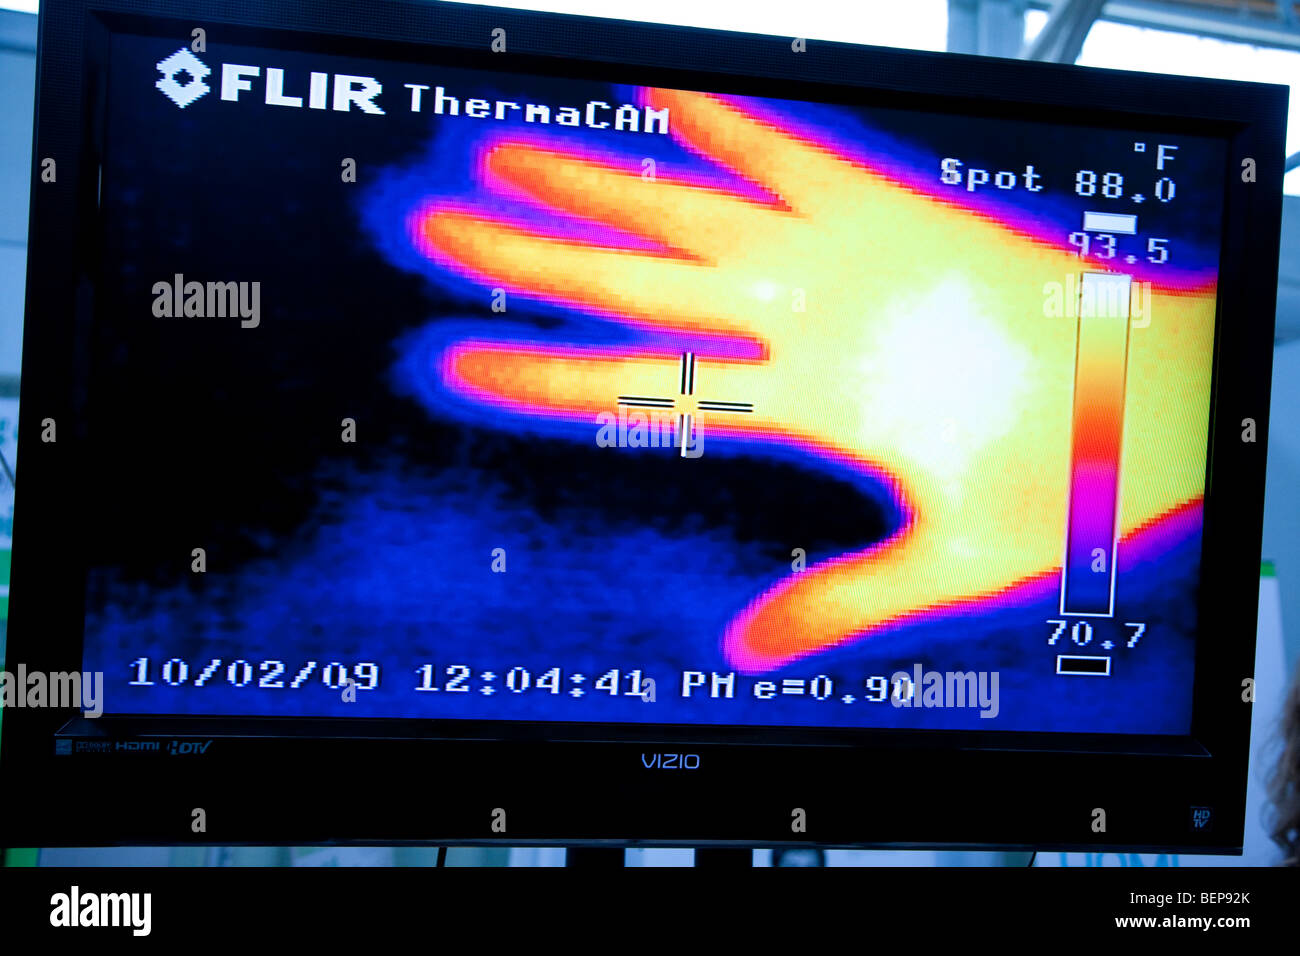 FLIR ThermaCAM shows the heat of a person's hand. The technology is used to help evaluate insulation needs in buildings. USA Stock Photo